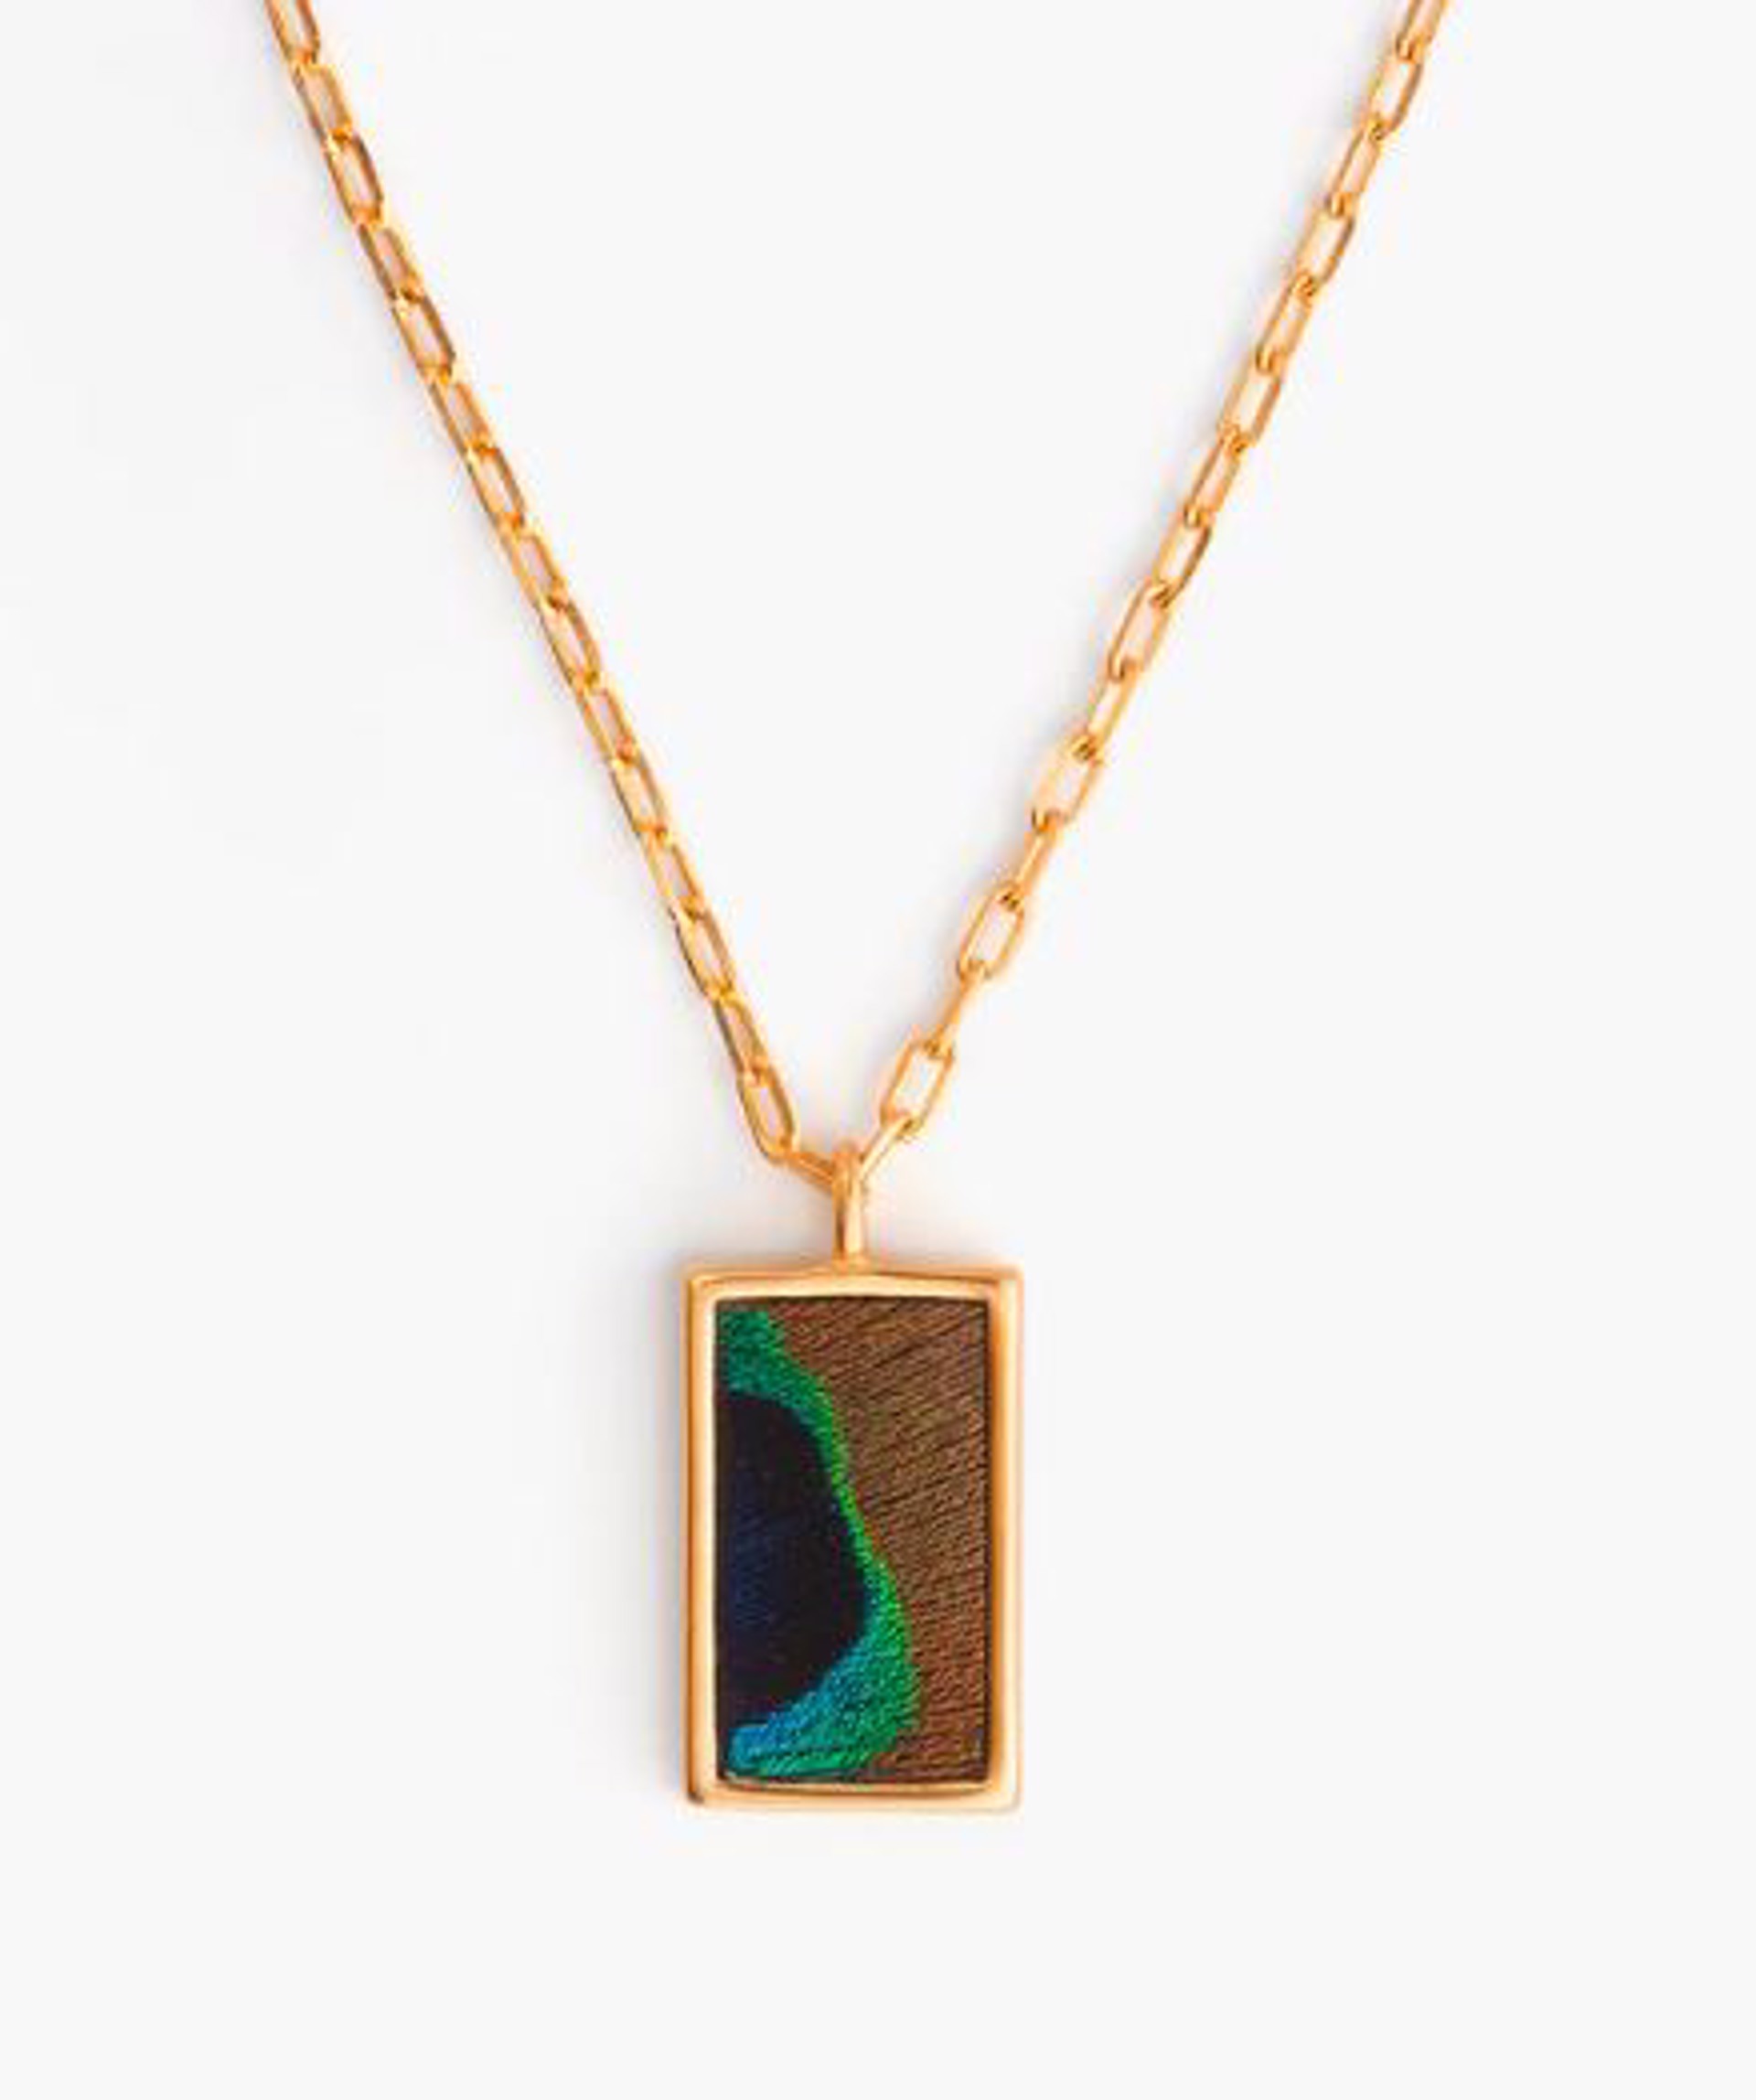 Qulit Rectangle Necklace - Peacock by Brackish